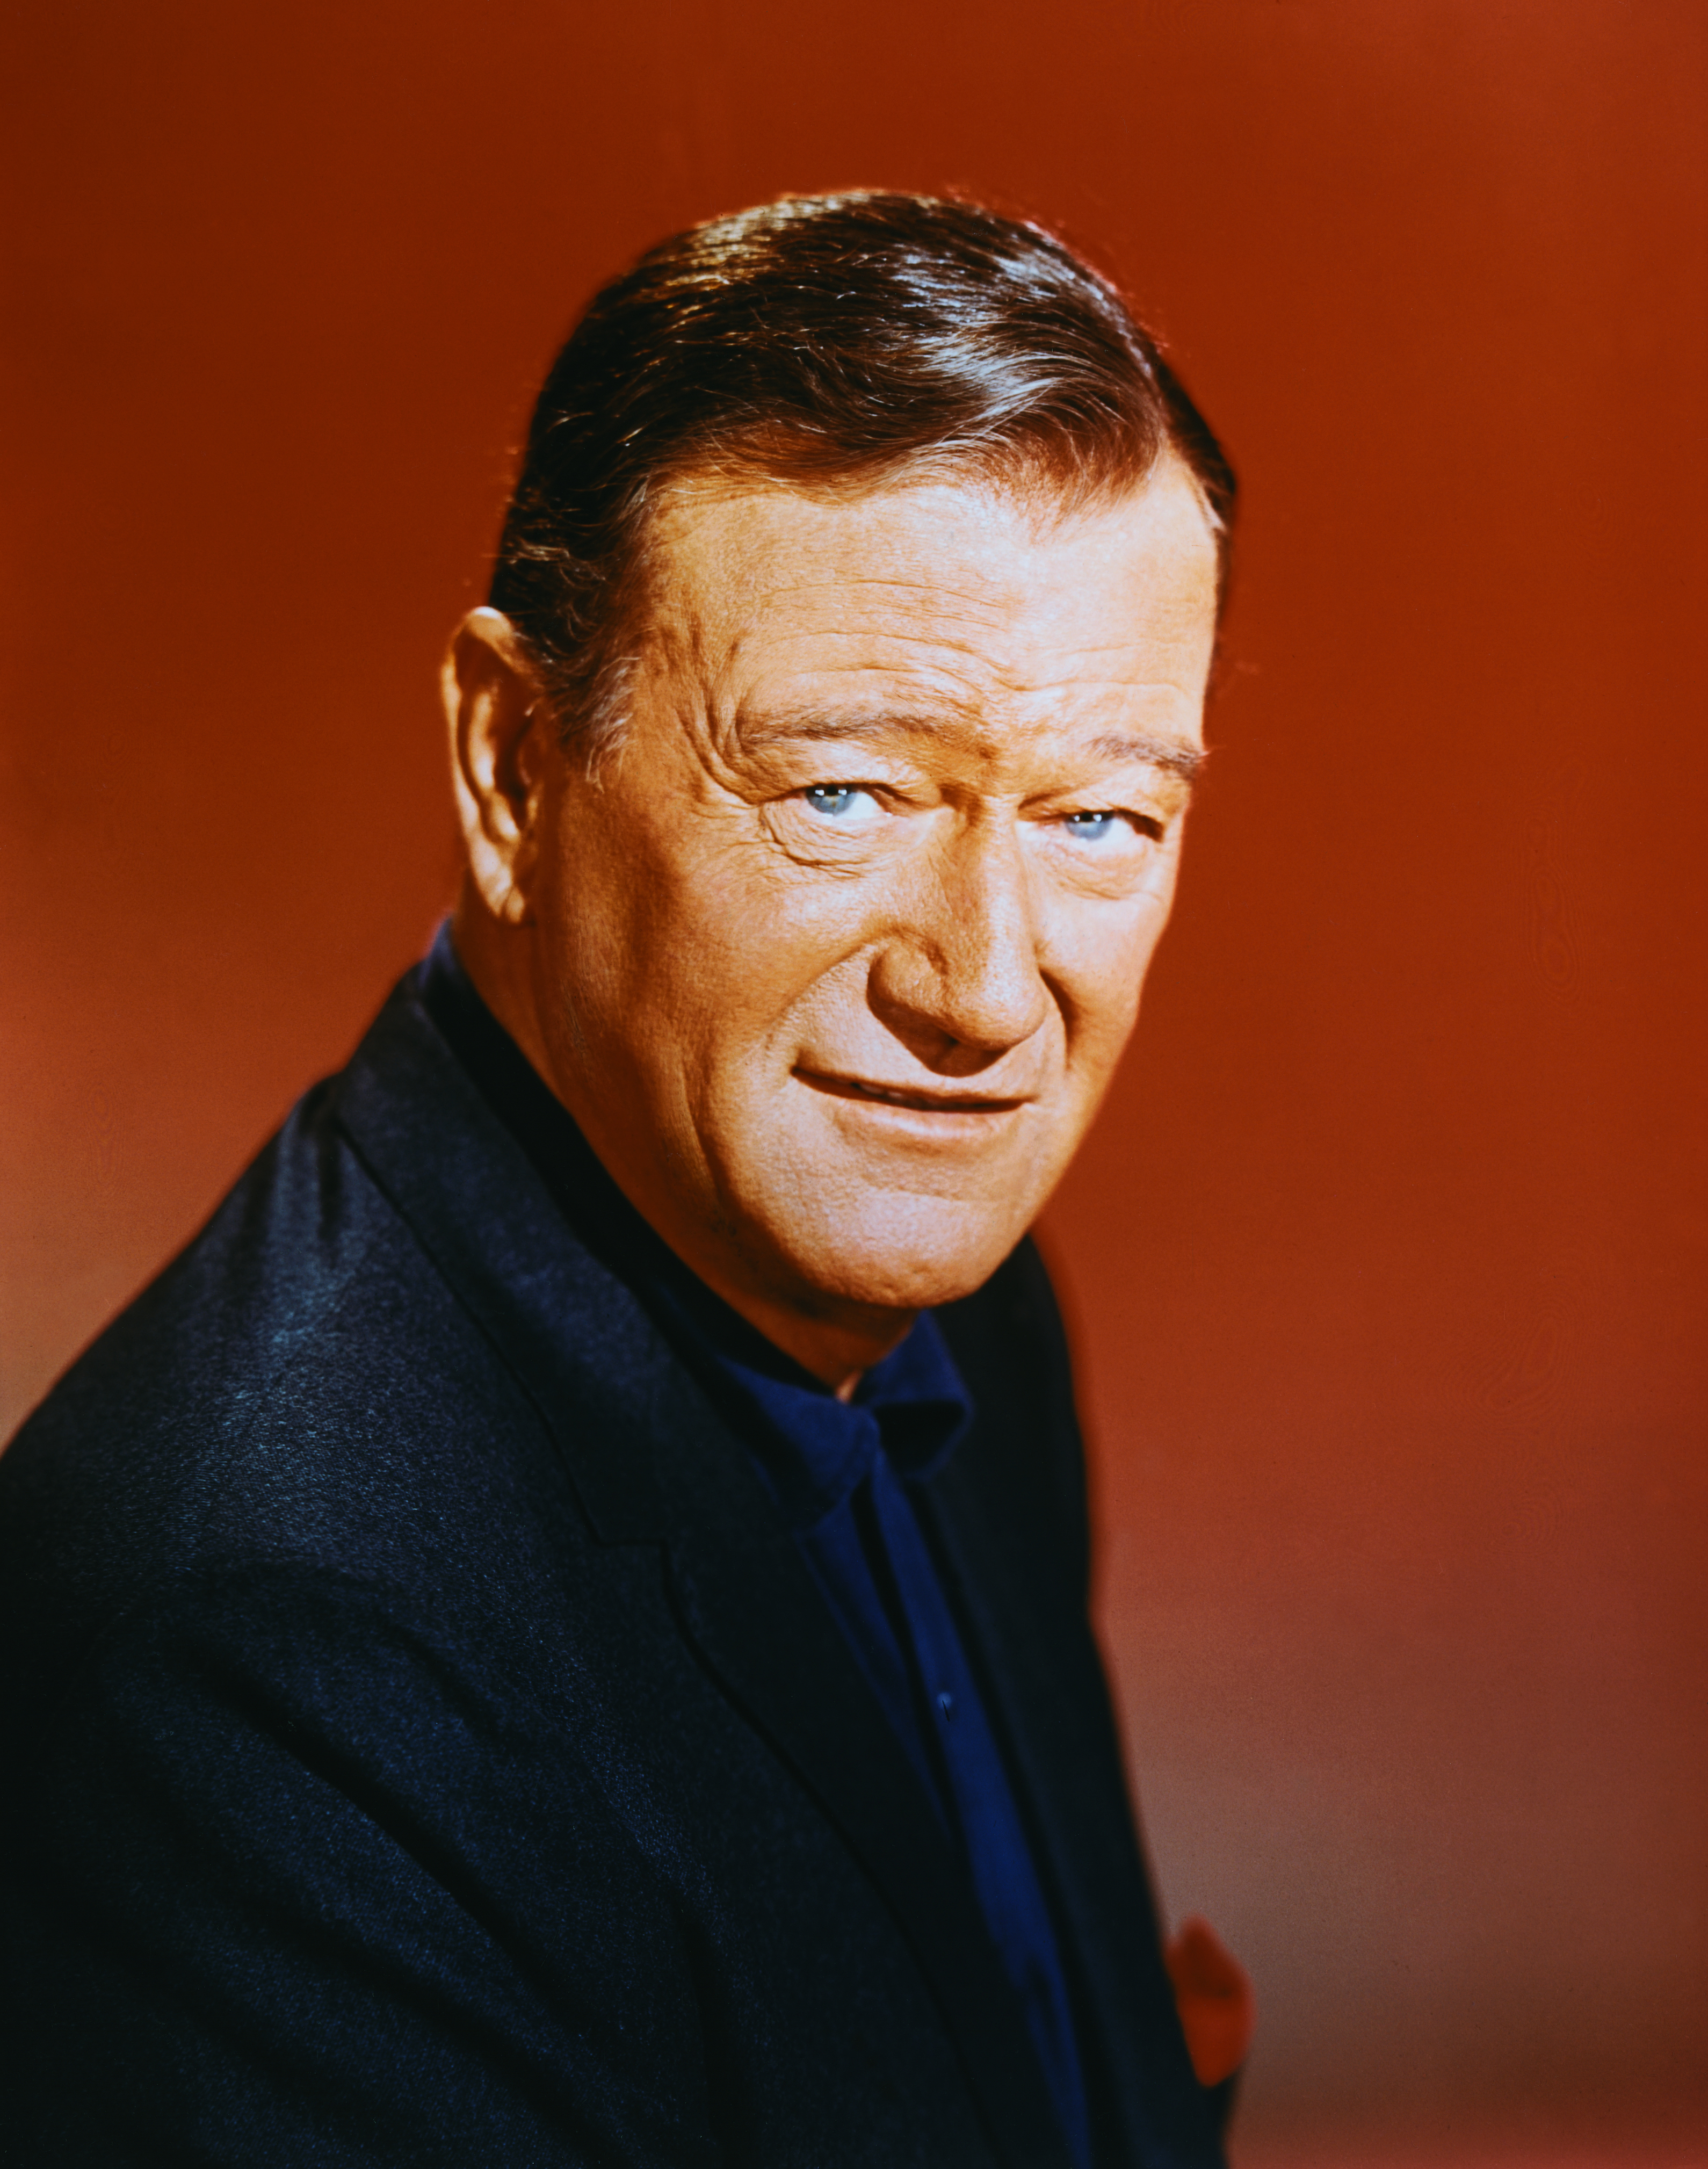 John Wayne posing for a photo in 1960. | Source: Getty Images